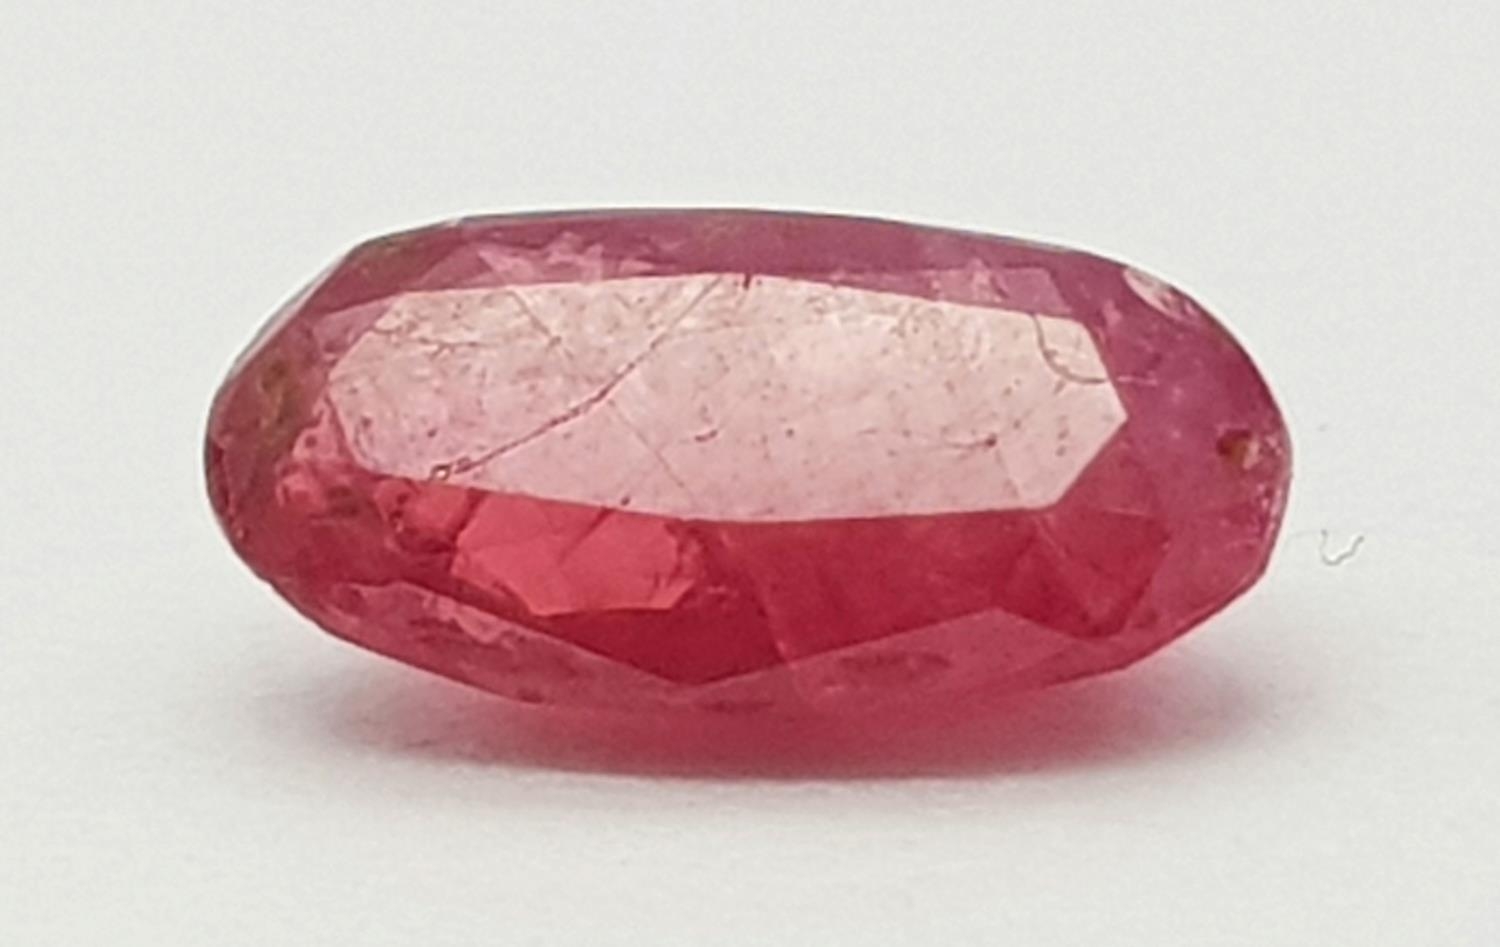 A 1.47ct Untreated Mozambique Ruby Gemstone - GFCO Swiss Certified.